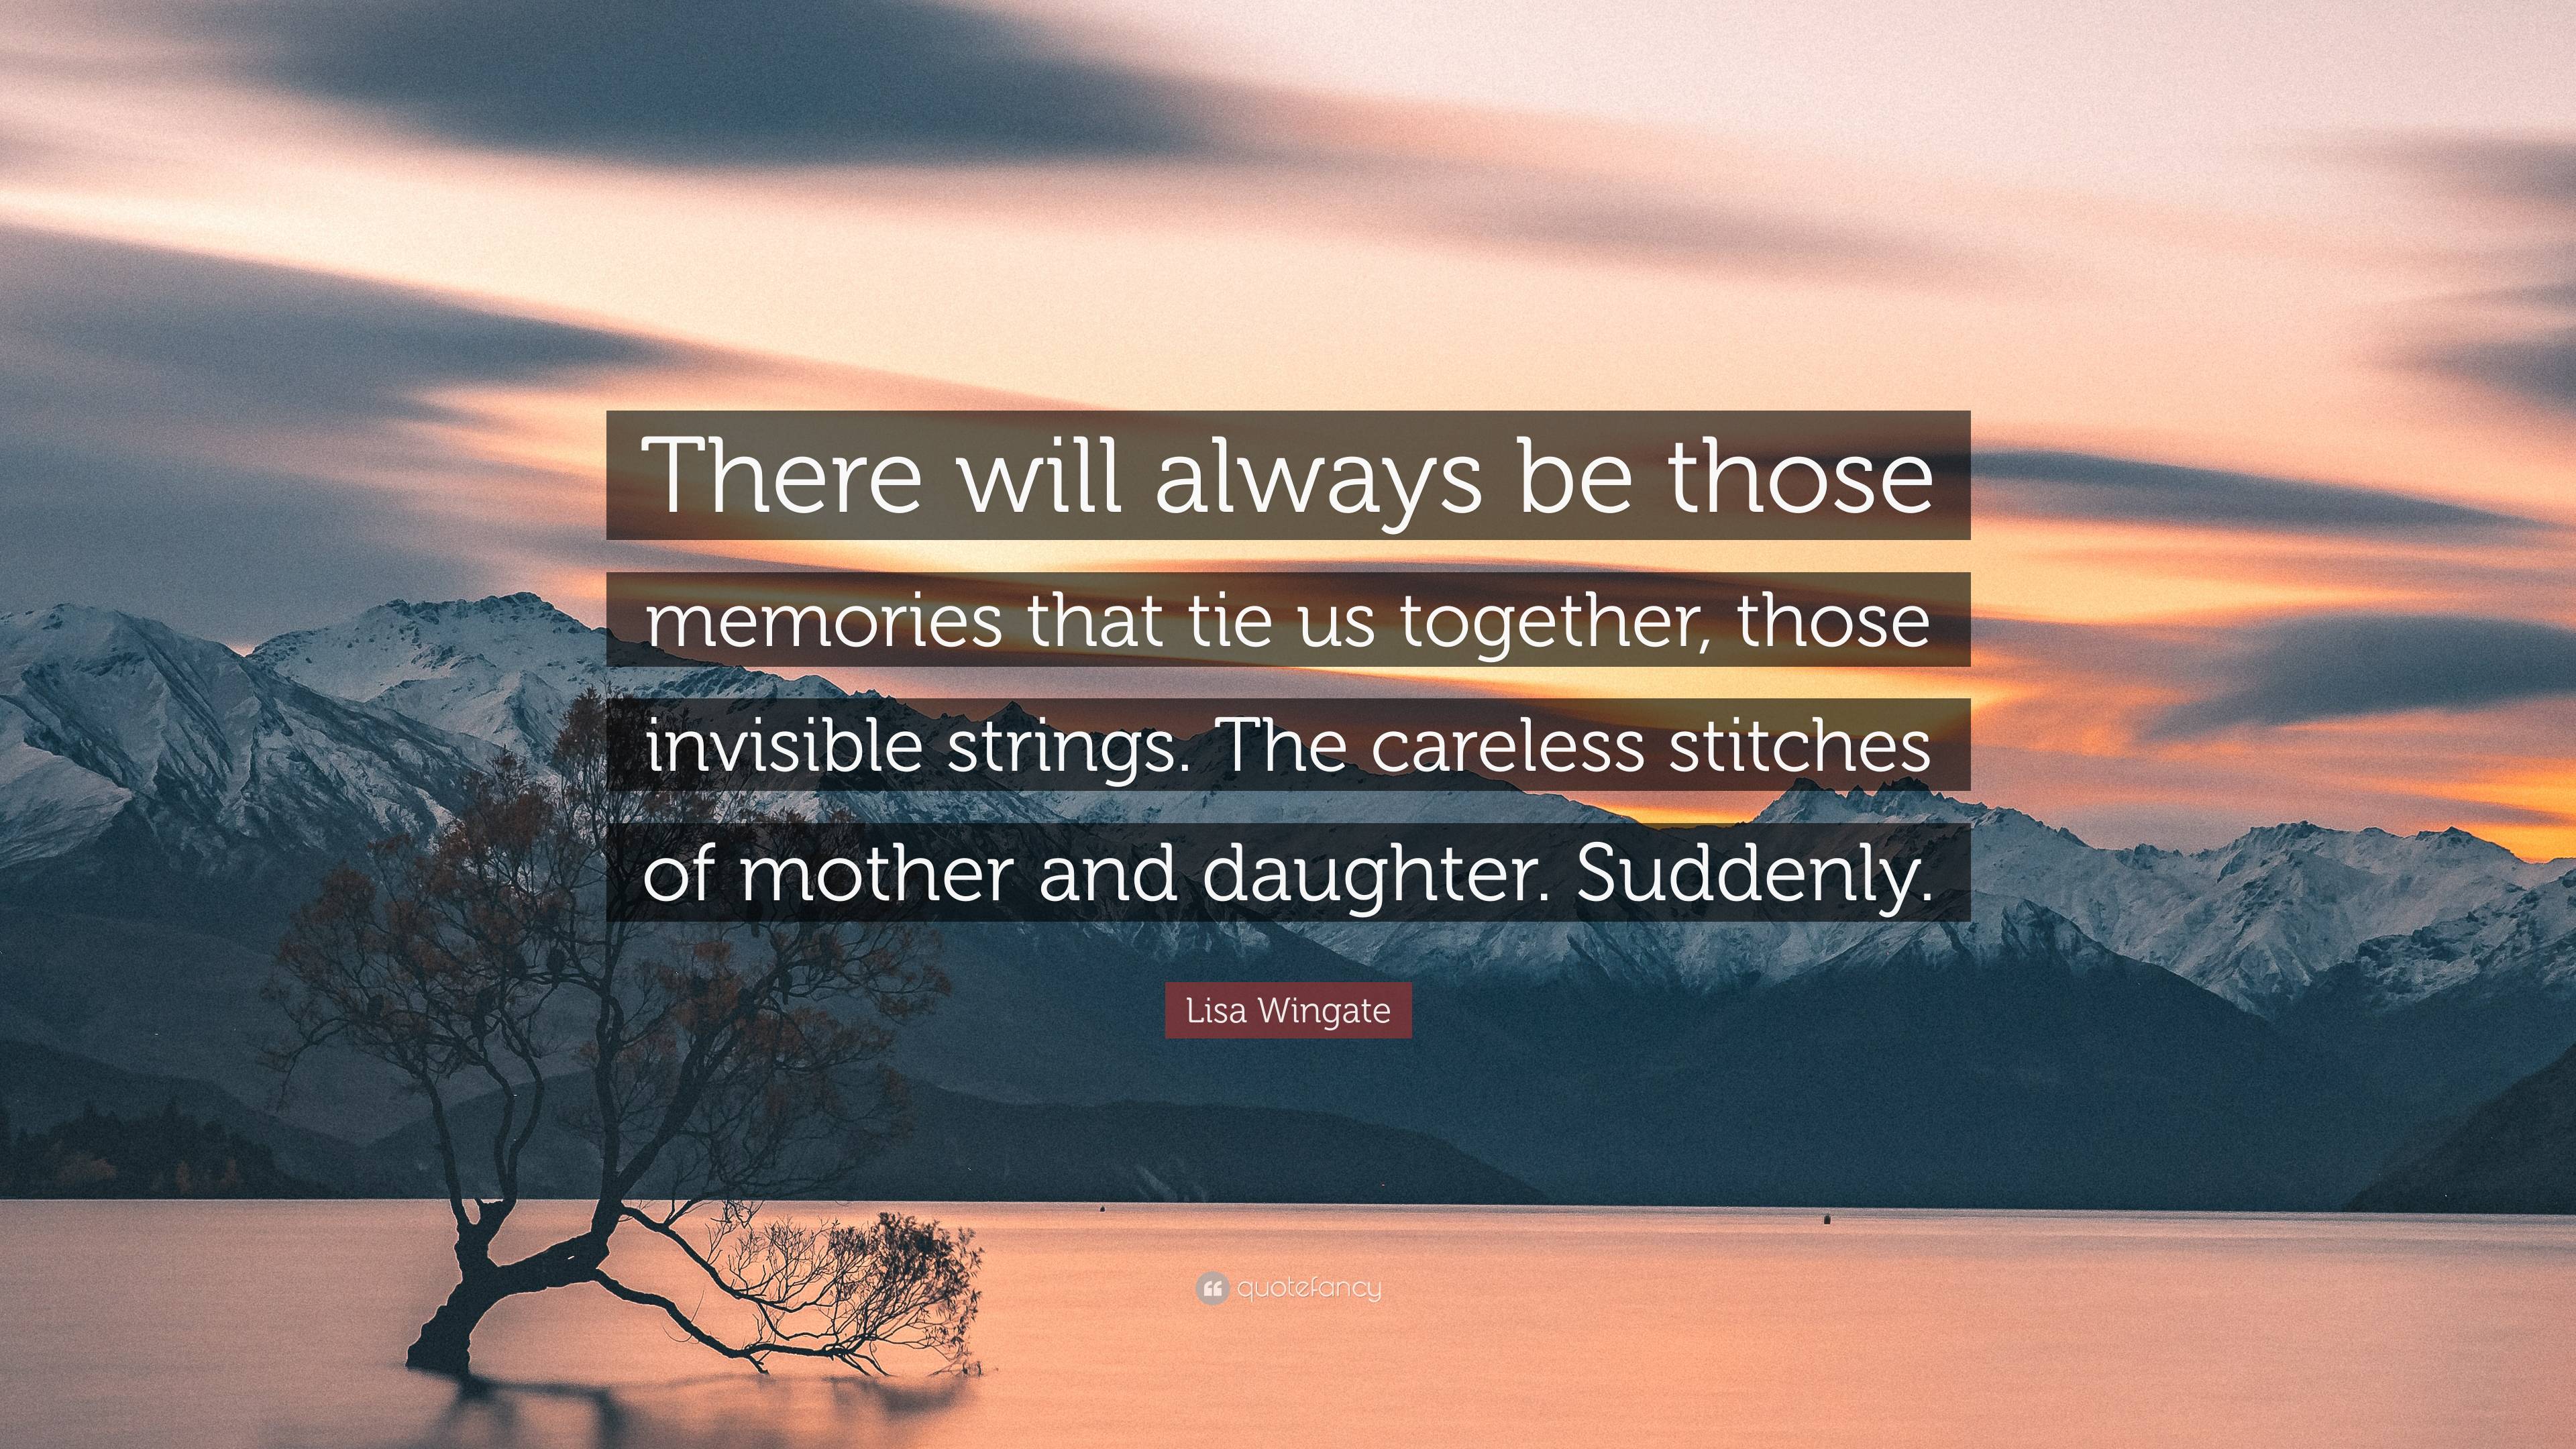 Lisa Wingate Quote: “There will always be those memories that tie us together, those invisible strings. The careless stitches of mother and d.”